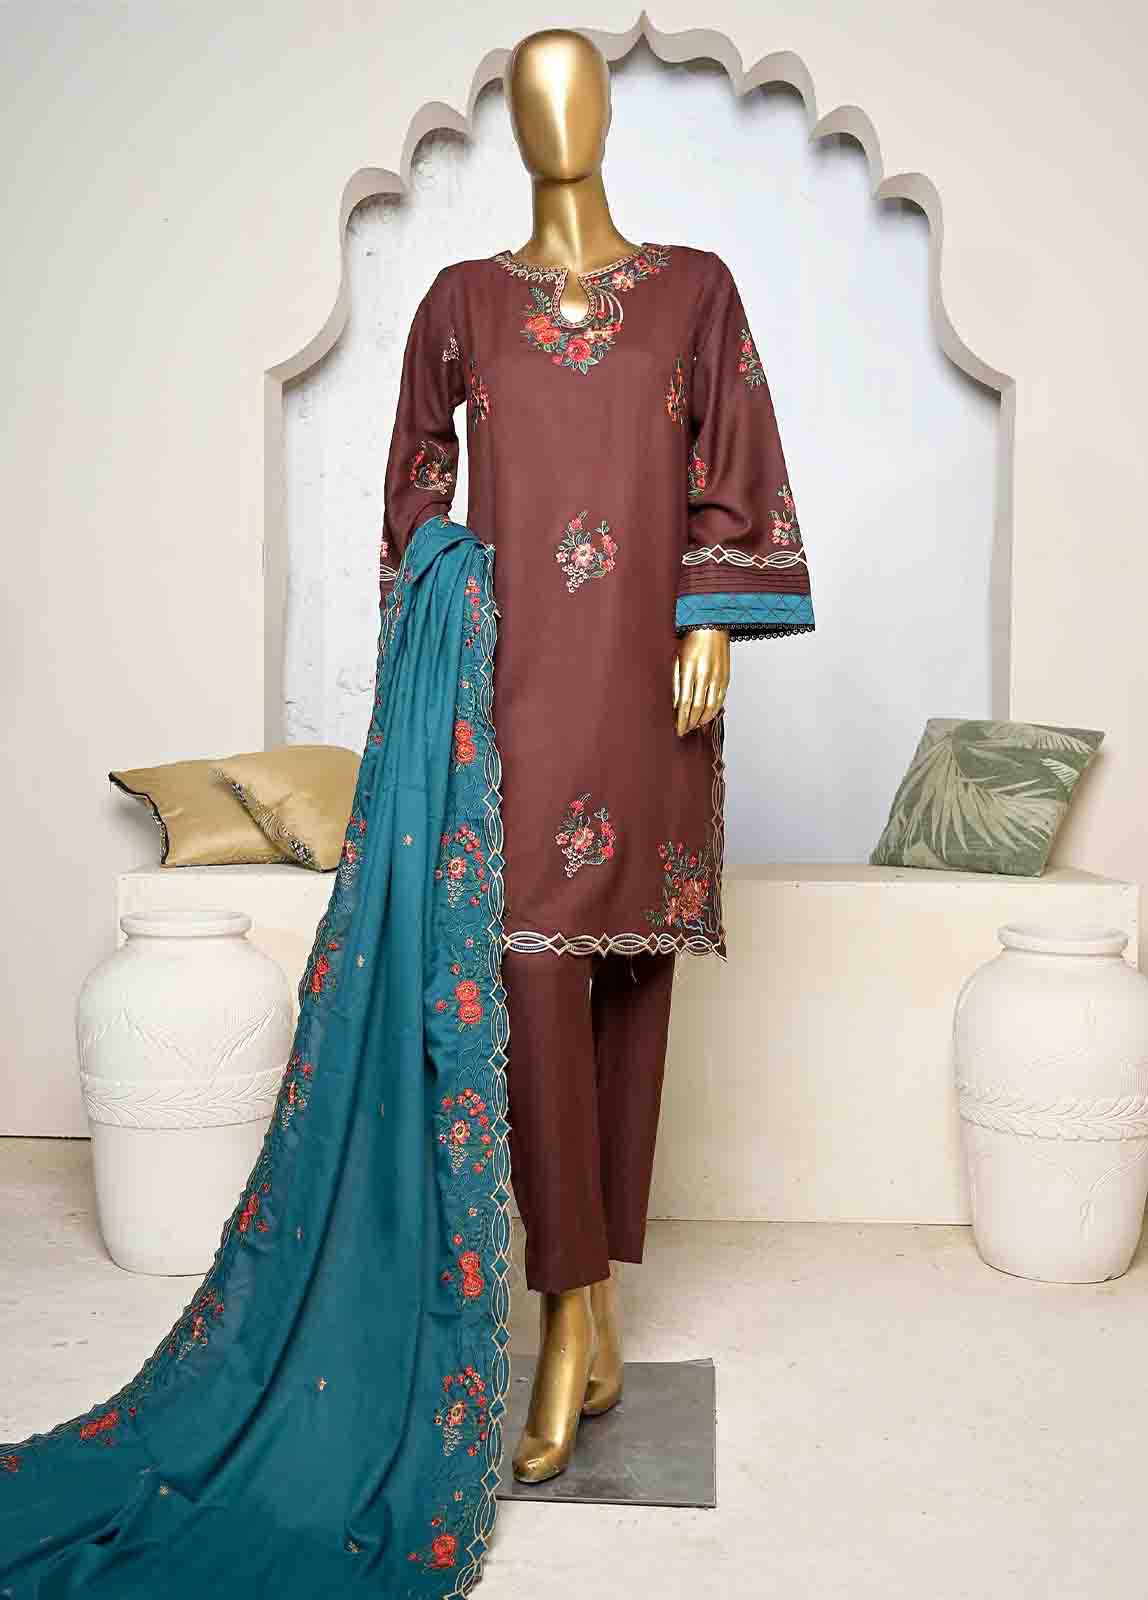 SmB-085-3 Piece Linen Embroidered collection